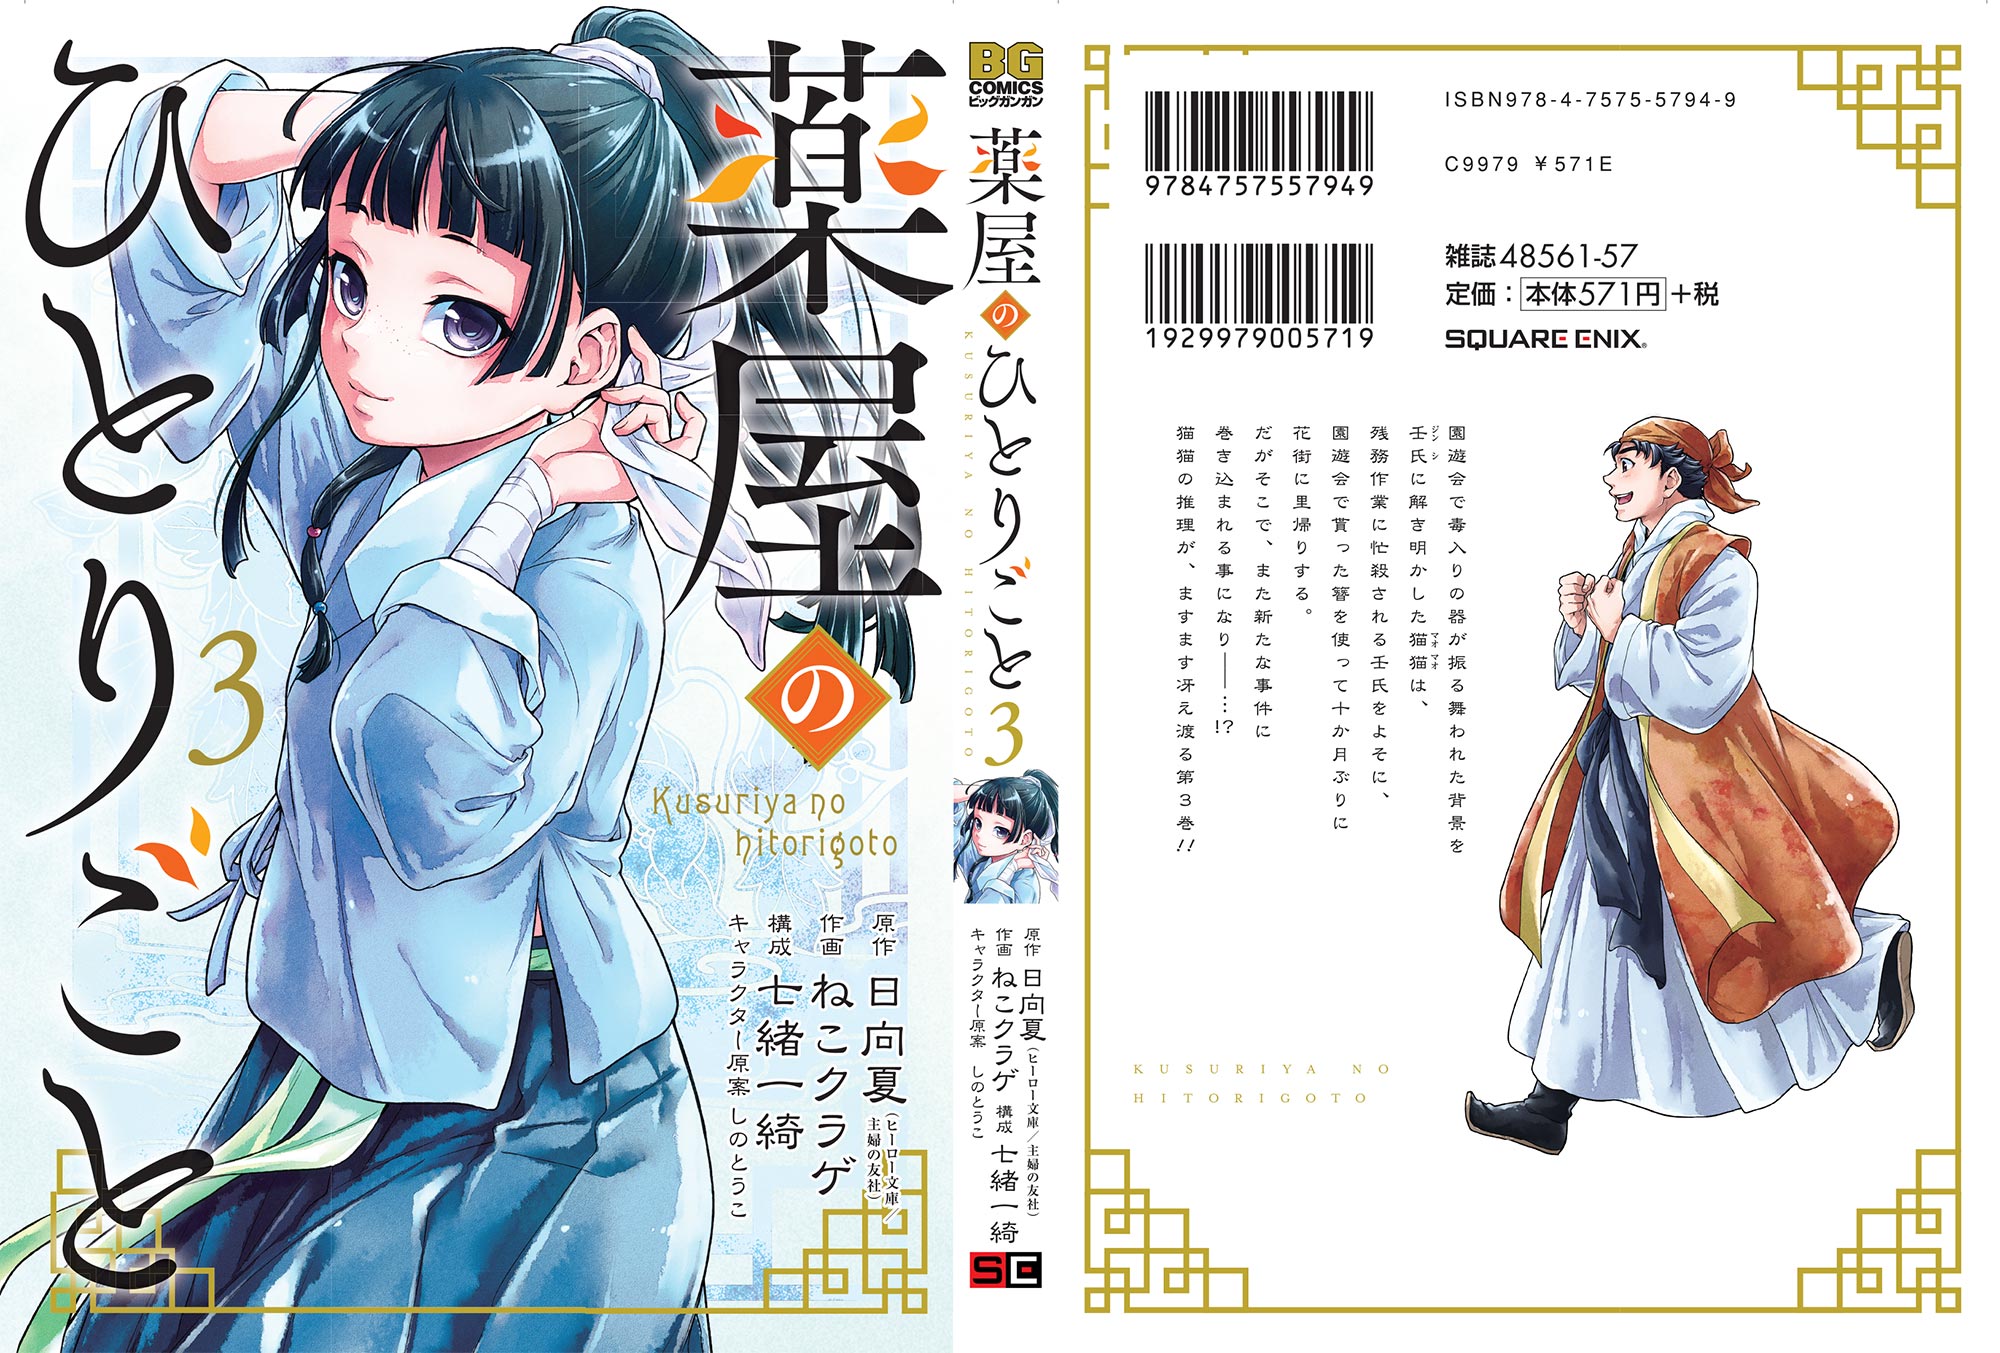 The Apothecary Diaries Volume 3 Jacket Japanese Cover